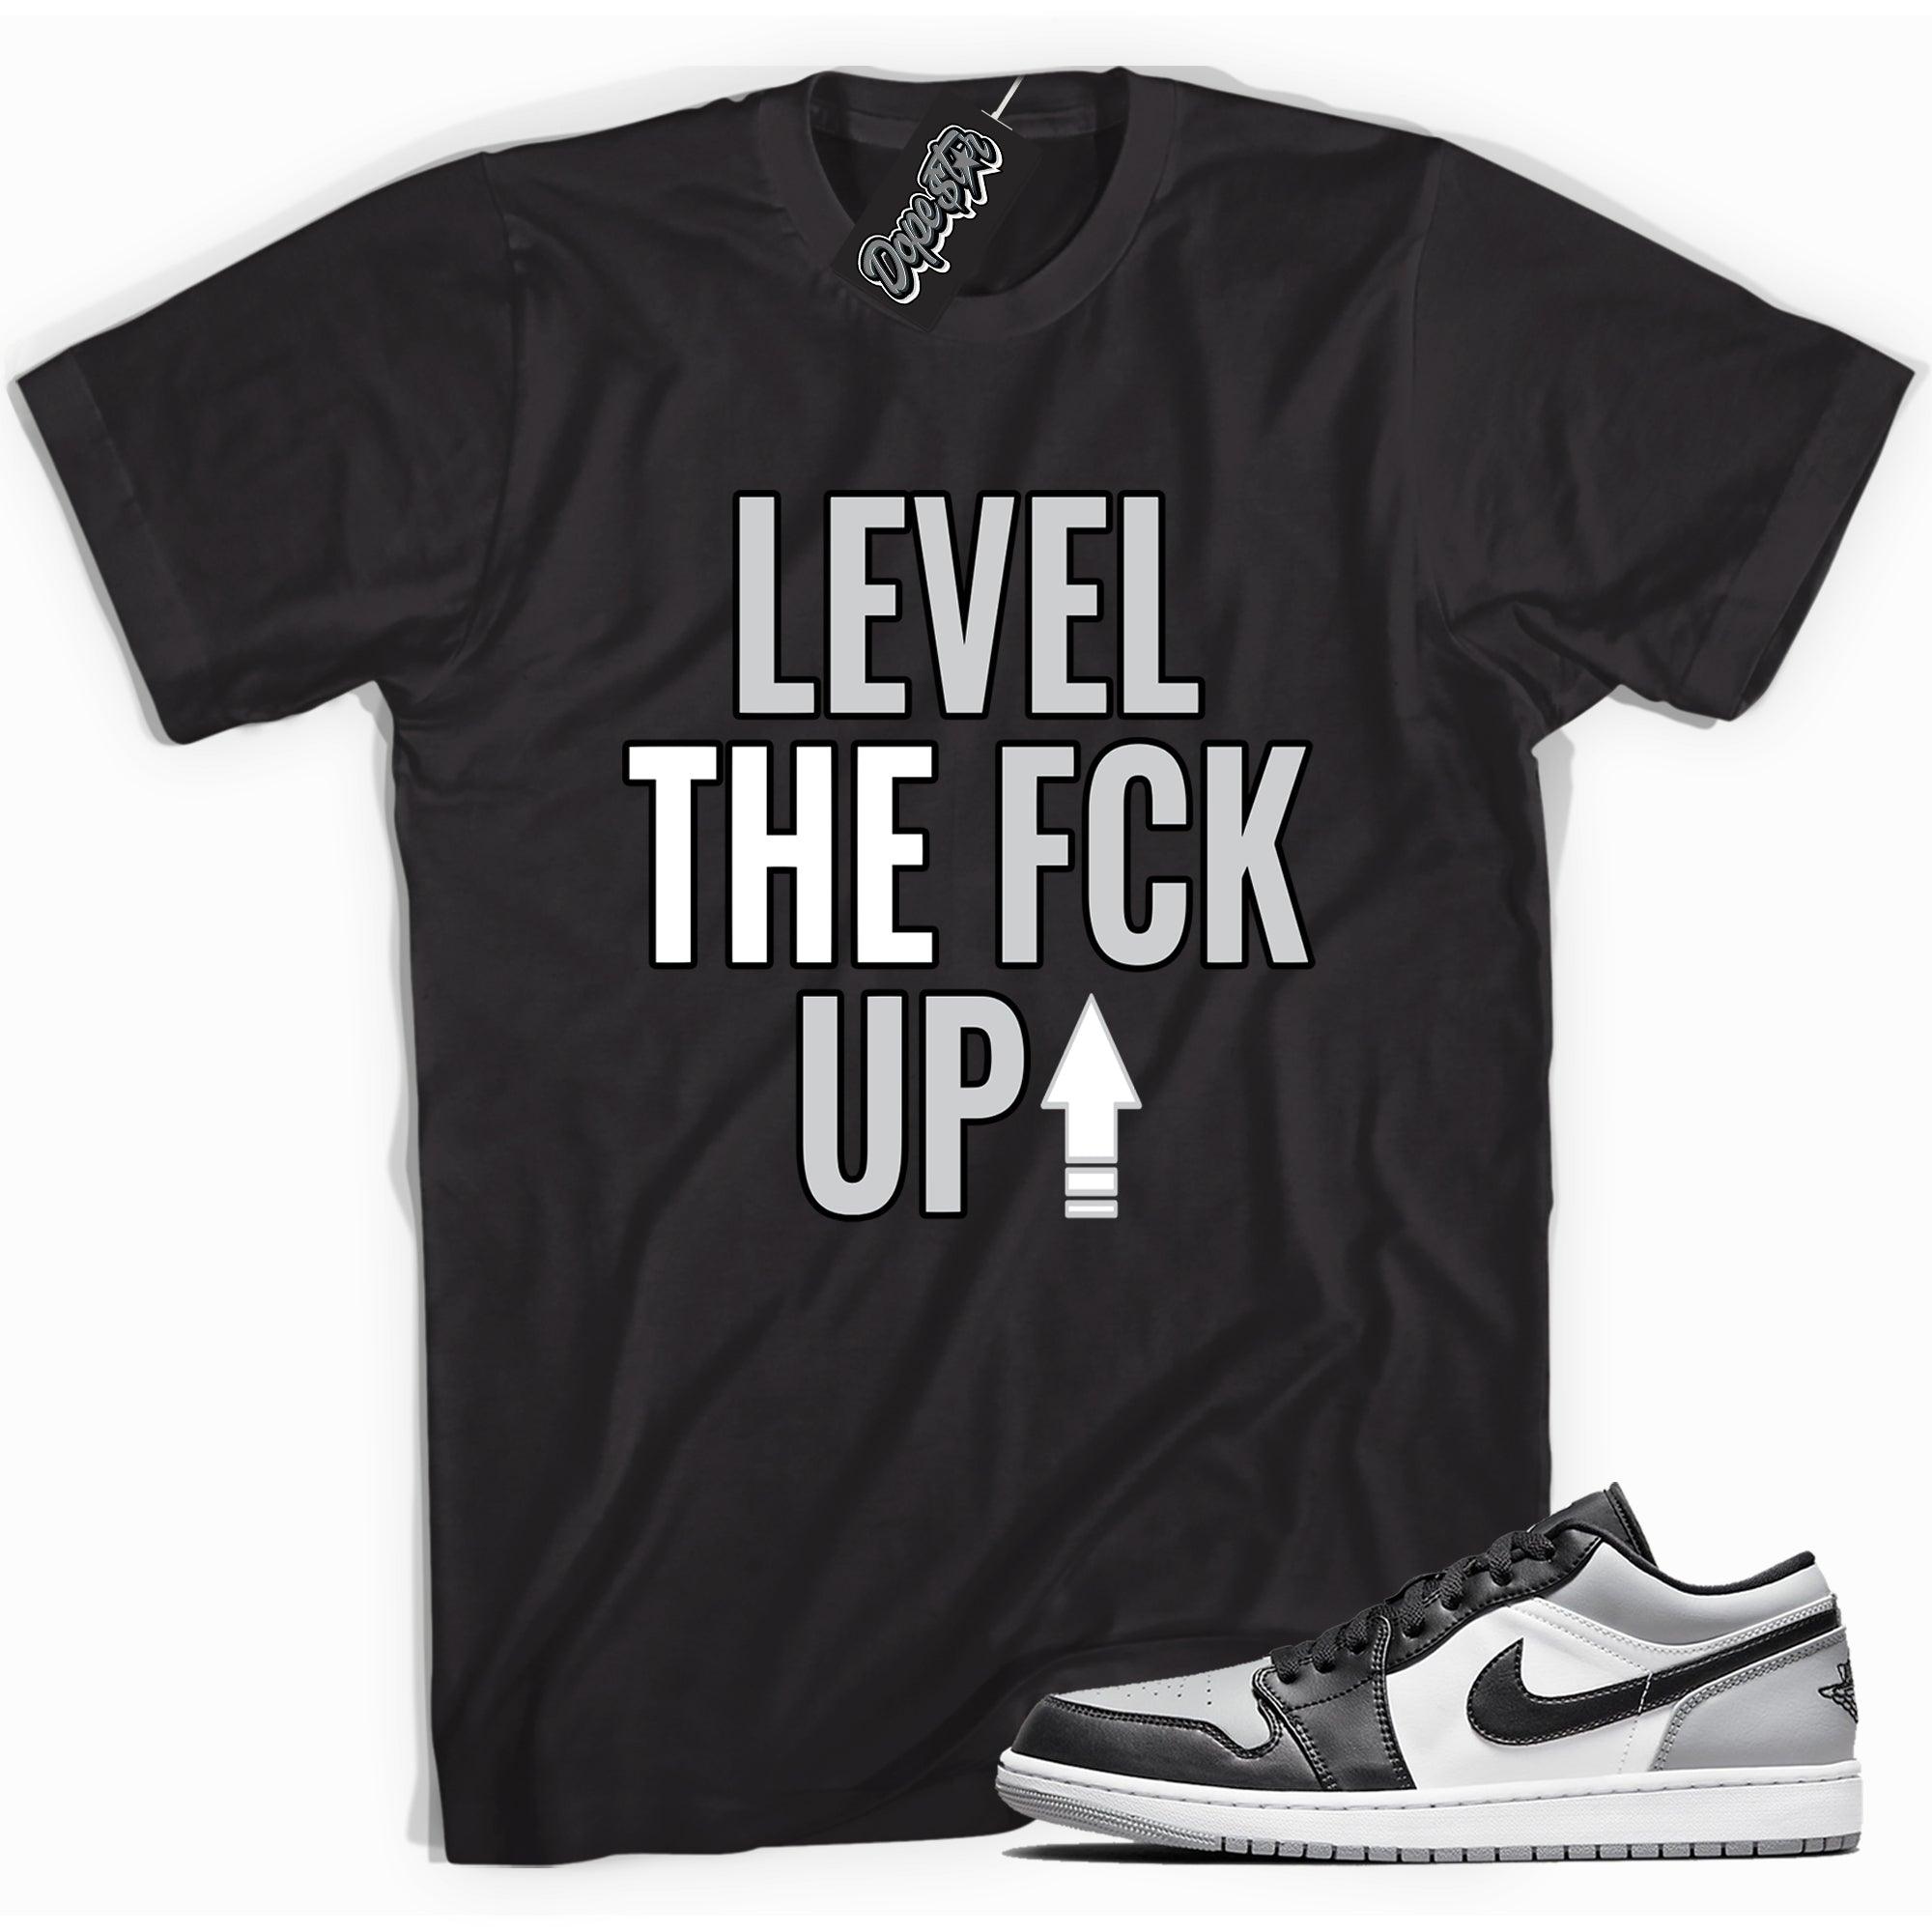 Cool black graphic tee with 'Level Up' print, that perfectly matches Air Jordan 1 Low Shadow Toe sneakers.